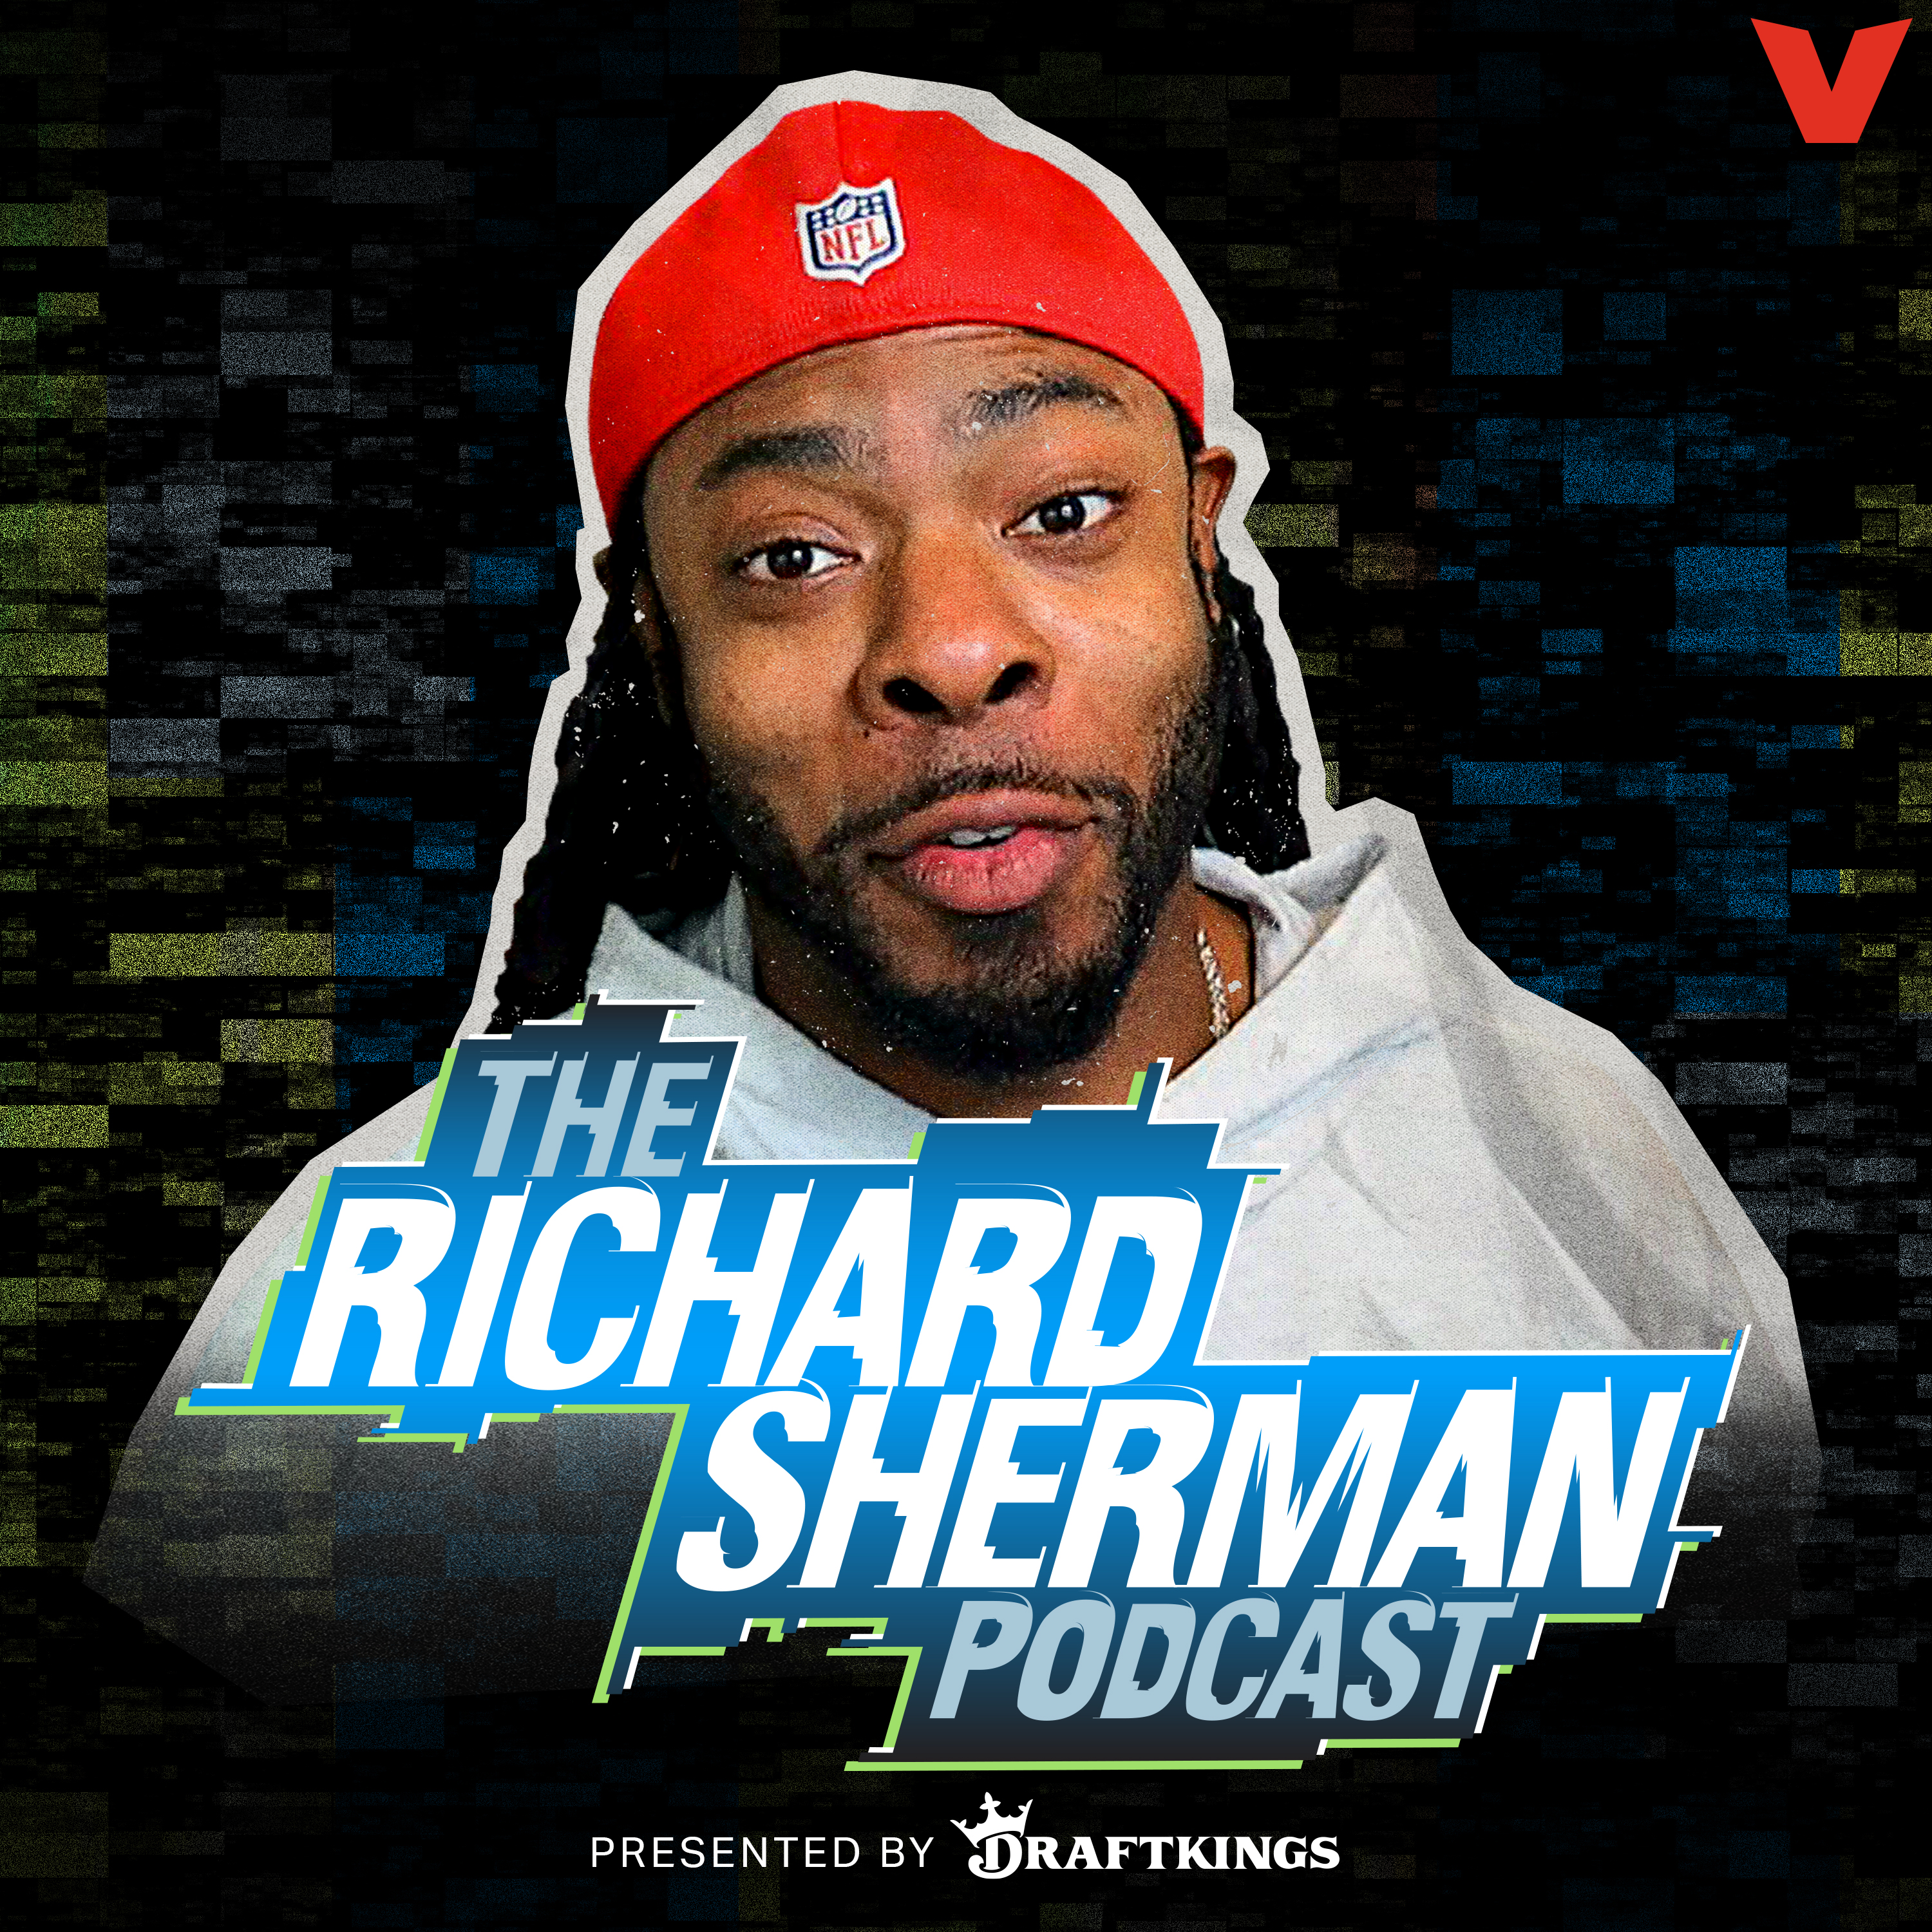 The Richard Sherman Podcast - NFL Schedule Release Reaction: 49ers, Seahawks, Cowboys & more